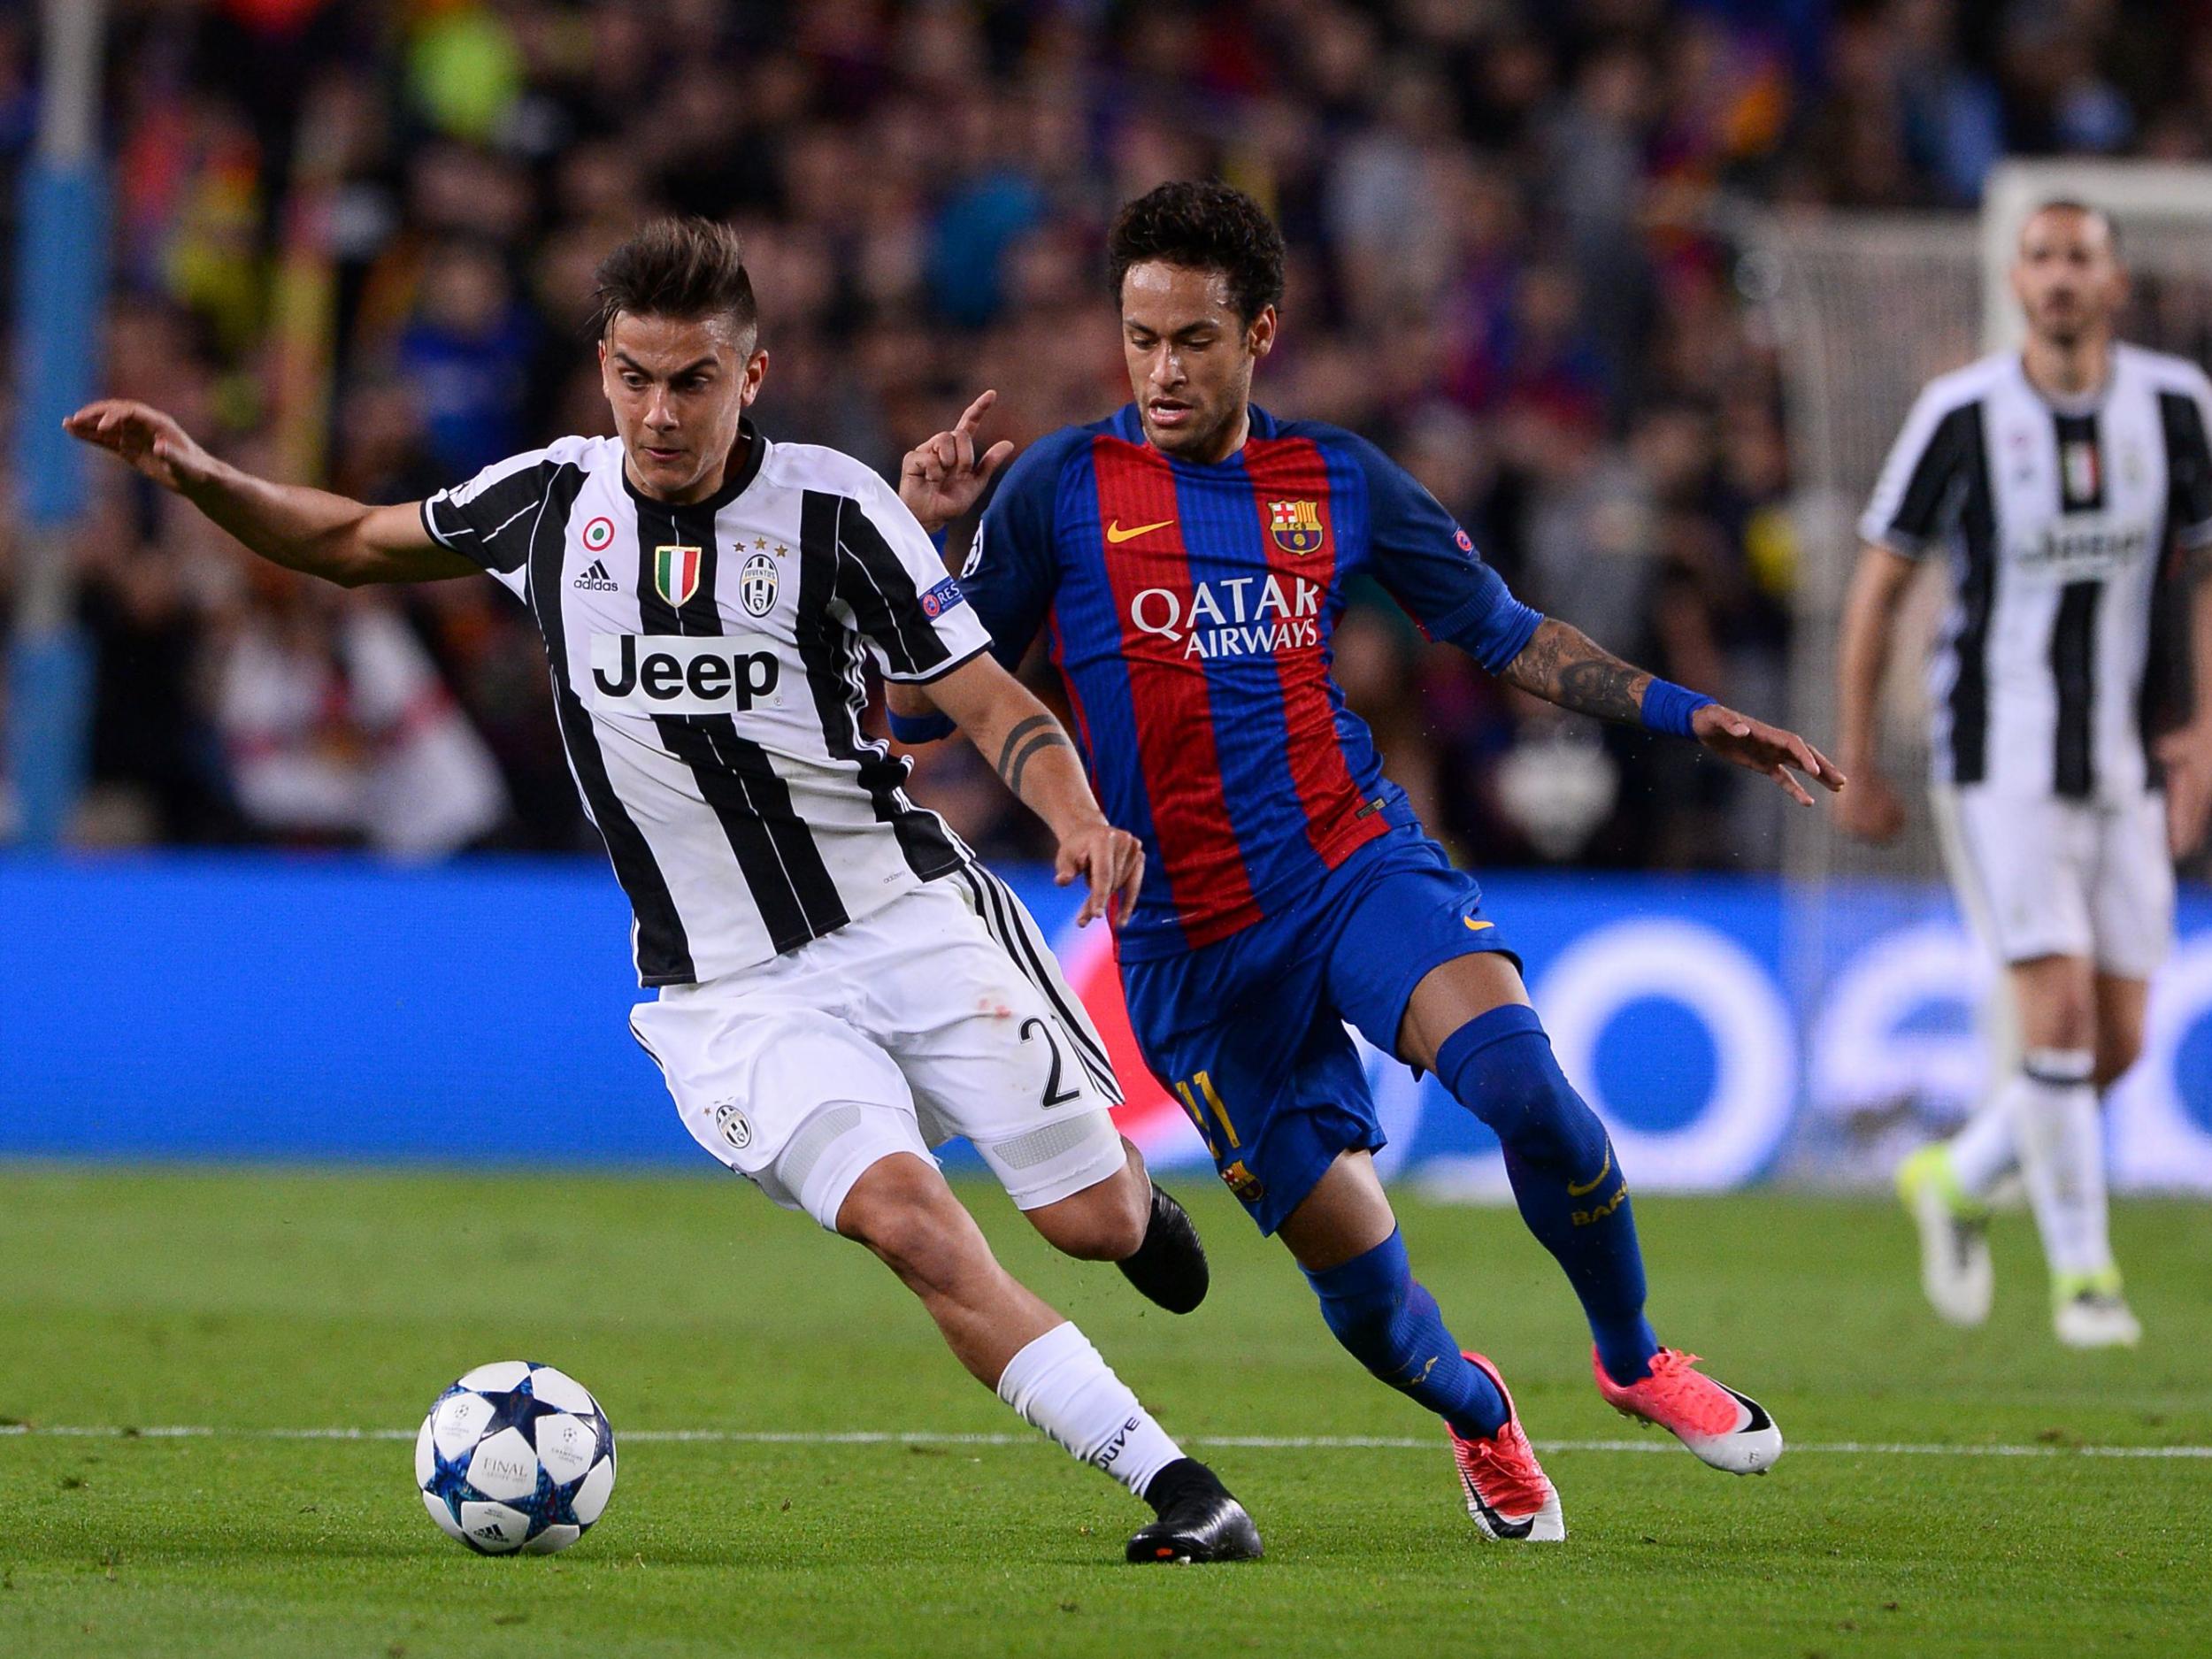 There looks to be little chance of Dybala joining Neymar at Barcelona